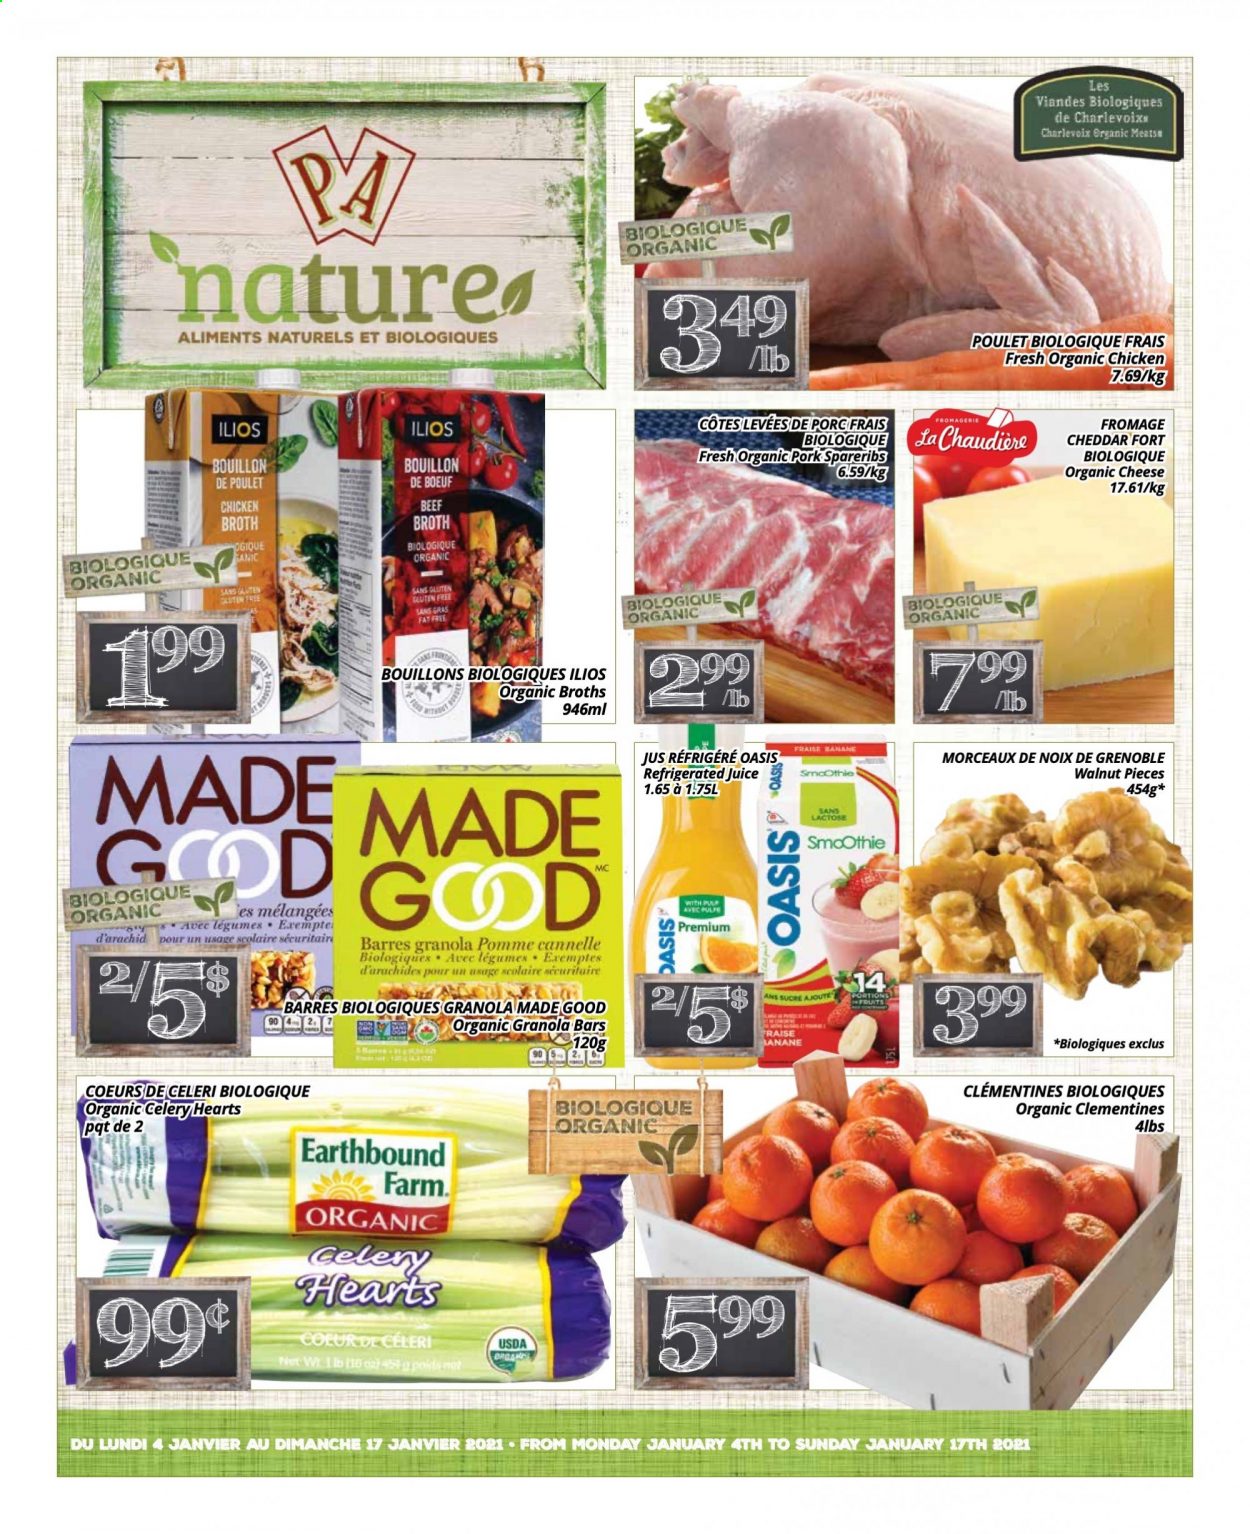 thumbnail - PA Nature Flyer - January 04, 2021 - January 17, 2021 - Sales products - celery, sleeved celery, clementines, cheddar, cheese, beef broth, bouillon, chicken broth, broth, granola bar, walnuts, juice, smoothie, pork spare ribs. Page 1.